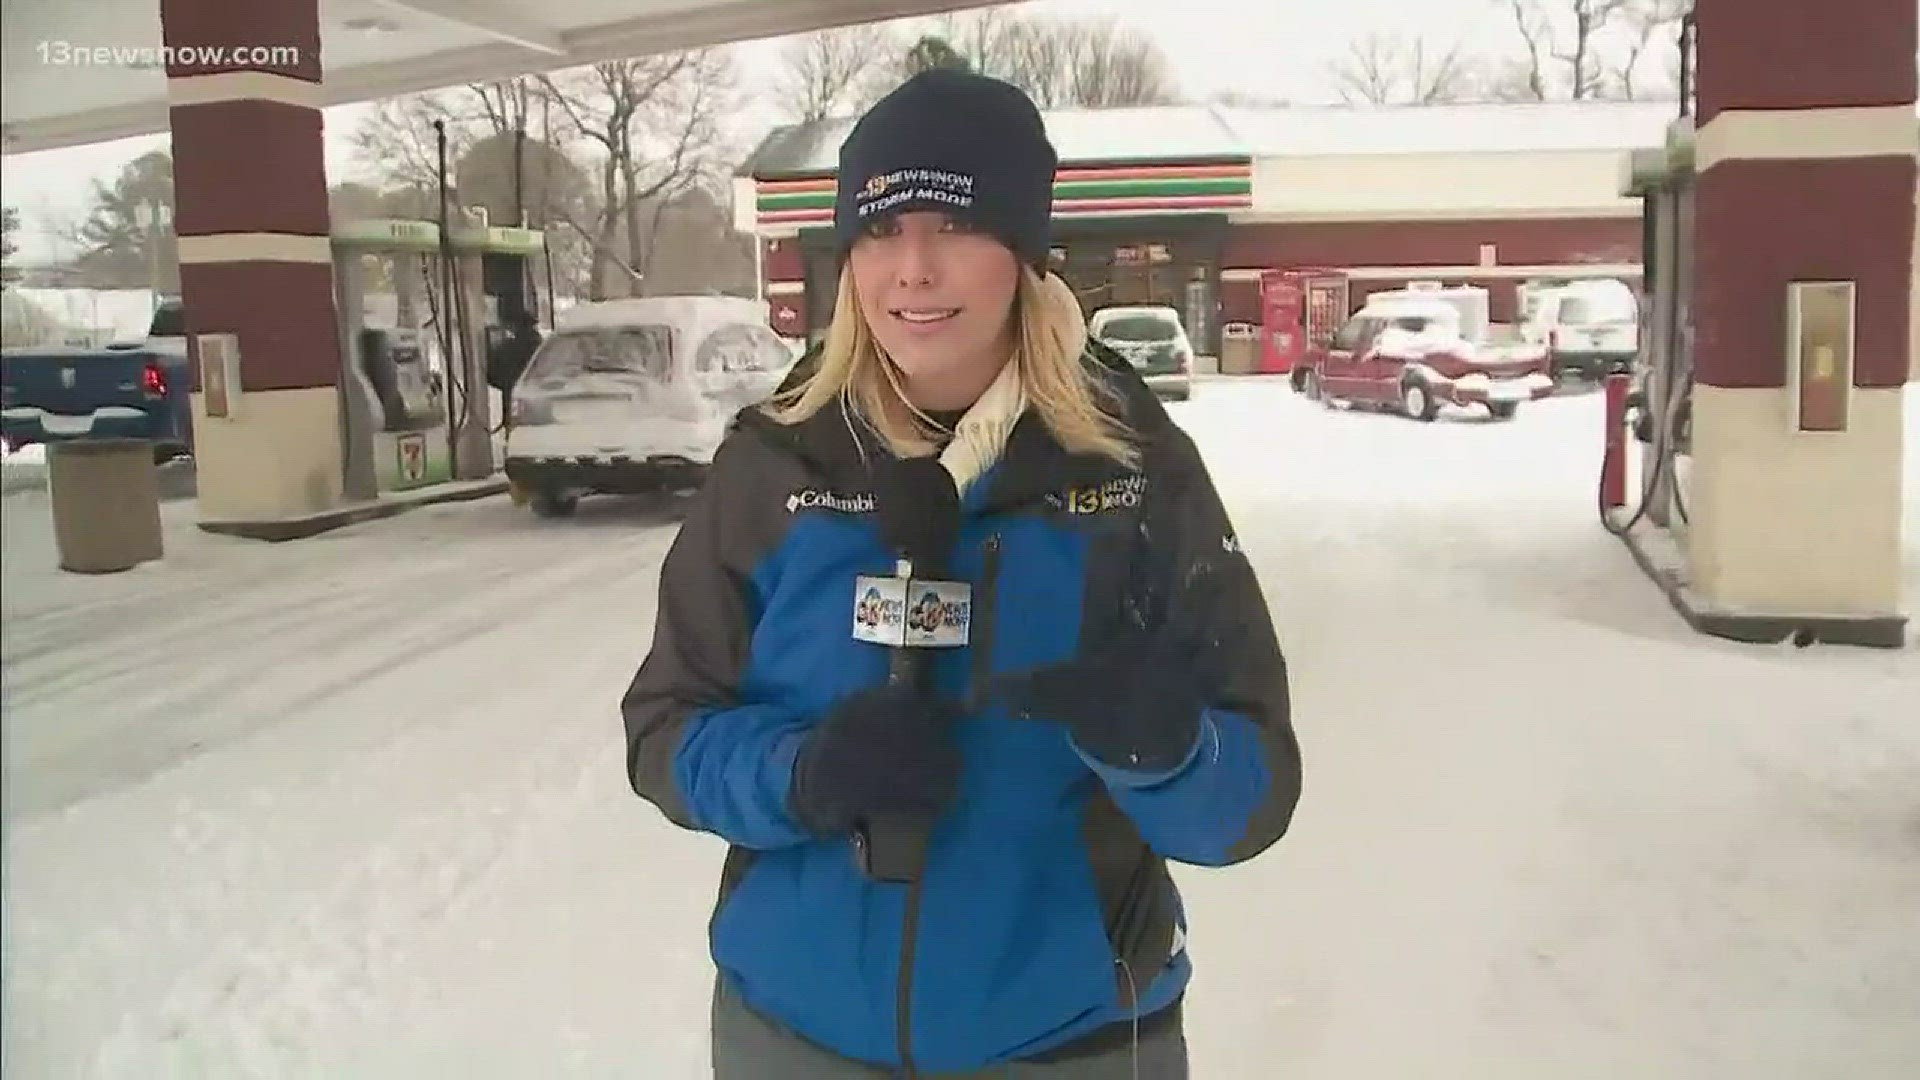 13News Now reporter Ali Weatherton is at a Chesapeake 7-Eleven that is still open, despite the frozen road conditions as a winter storm bears down.